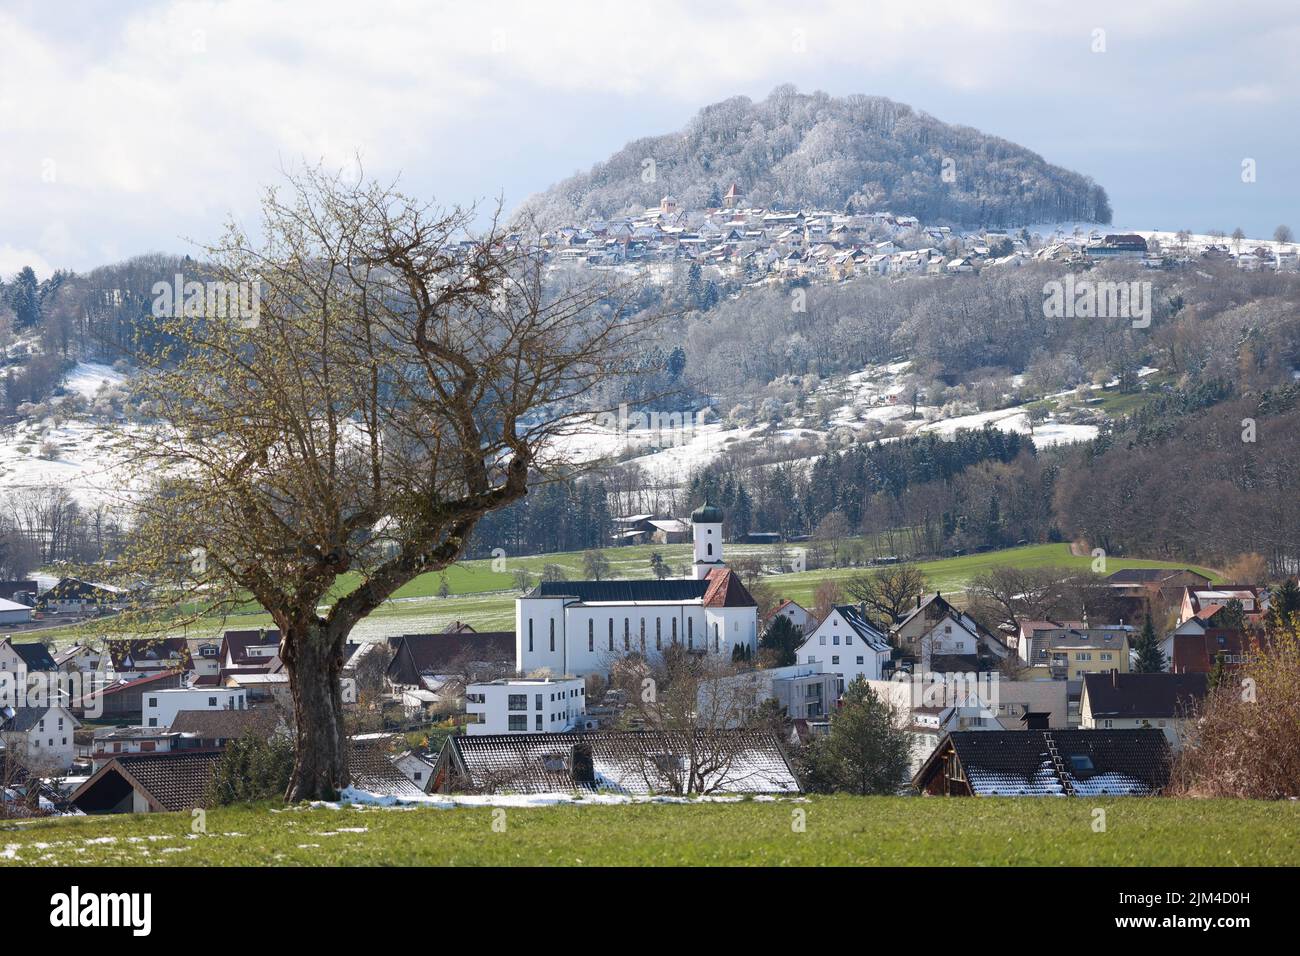 The town of Ottenbach in Germany in winter Stock Photo